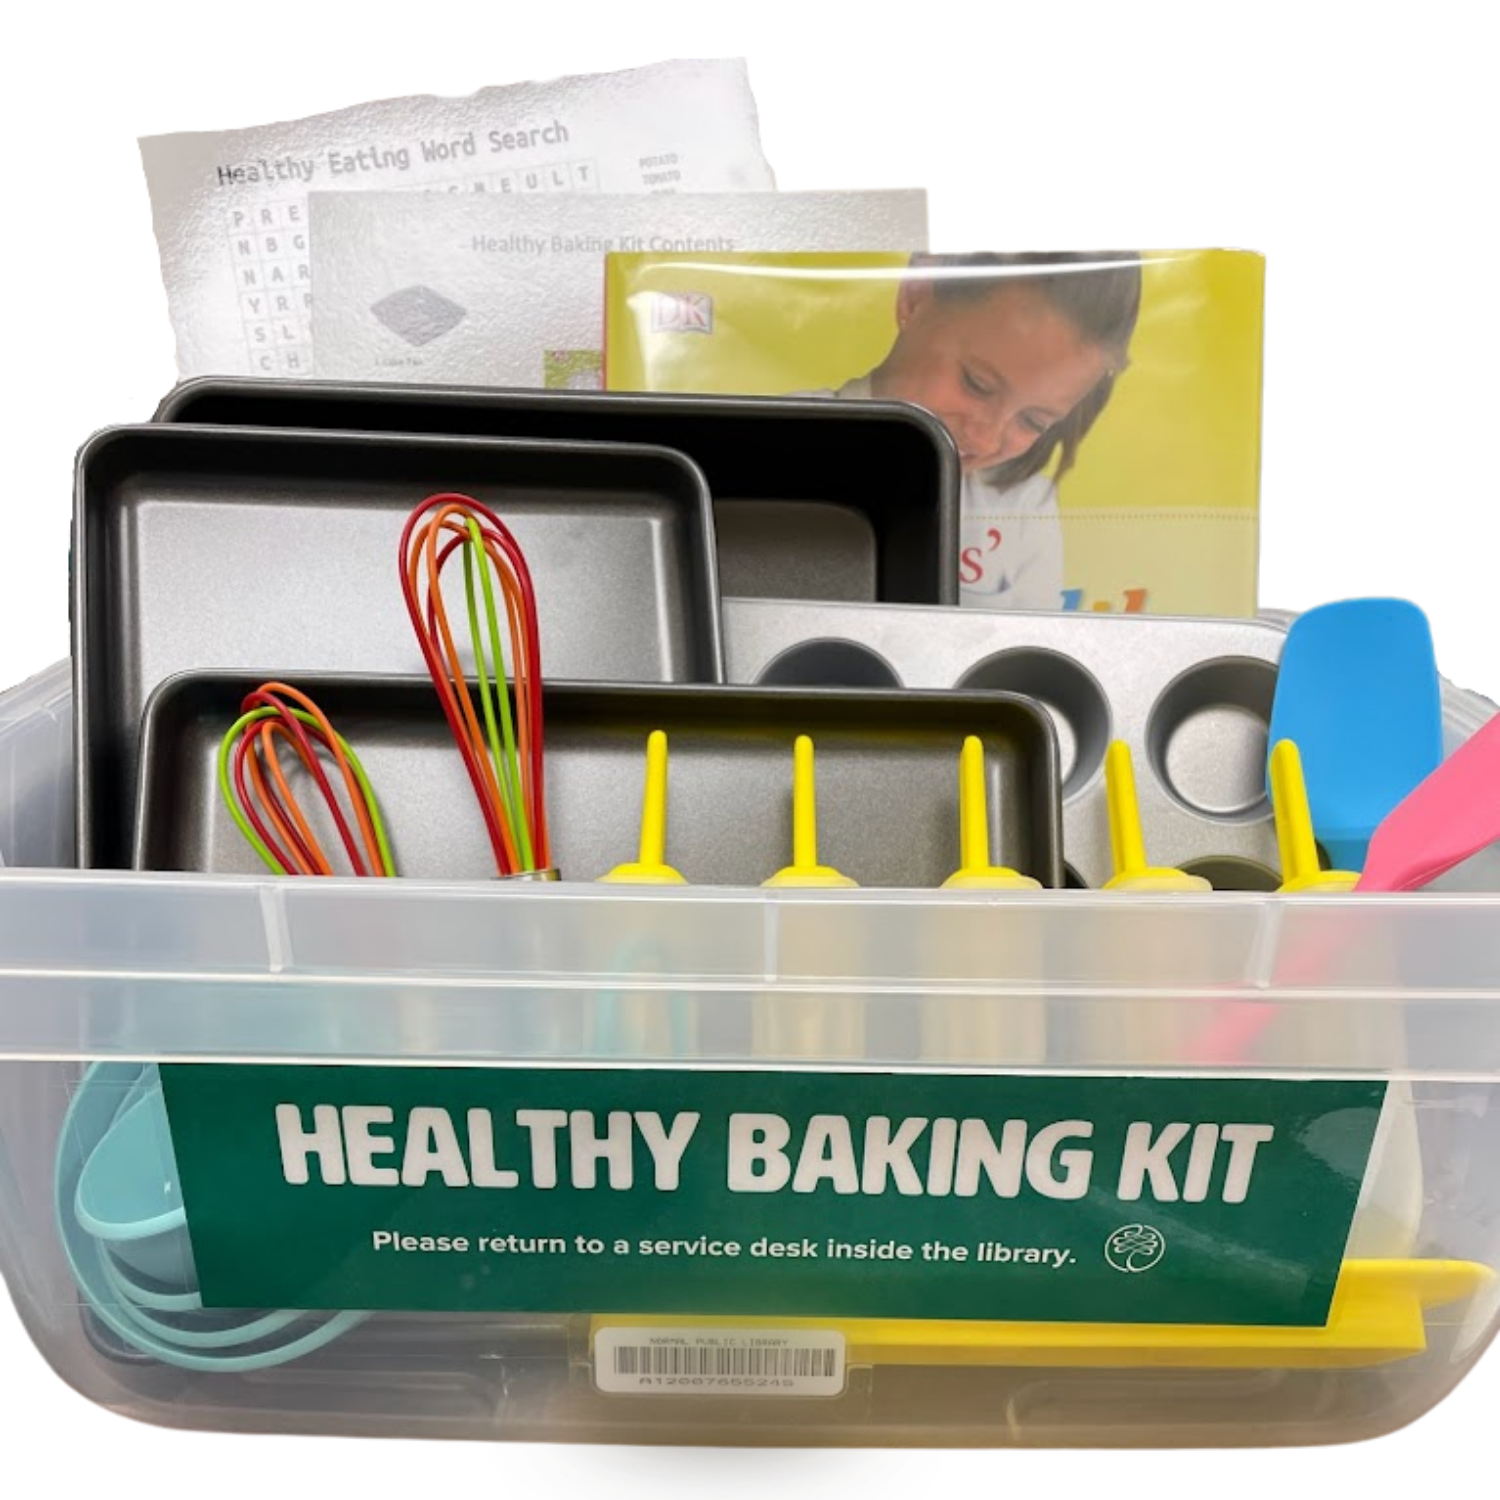 Healthy Baking Kit Contents